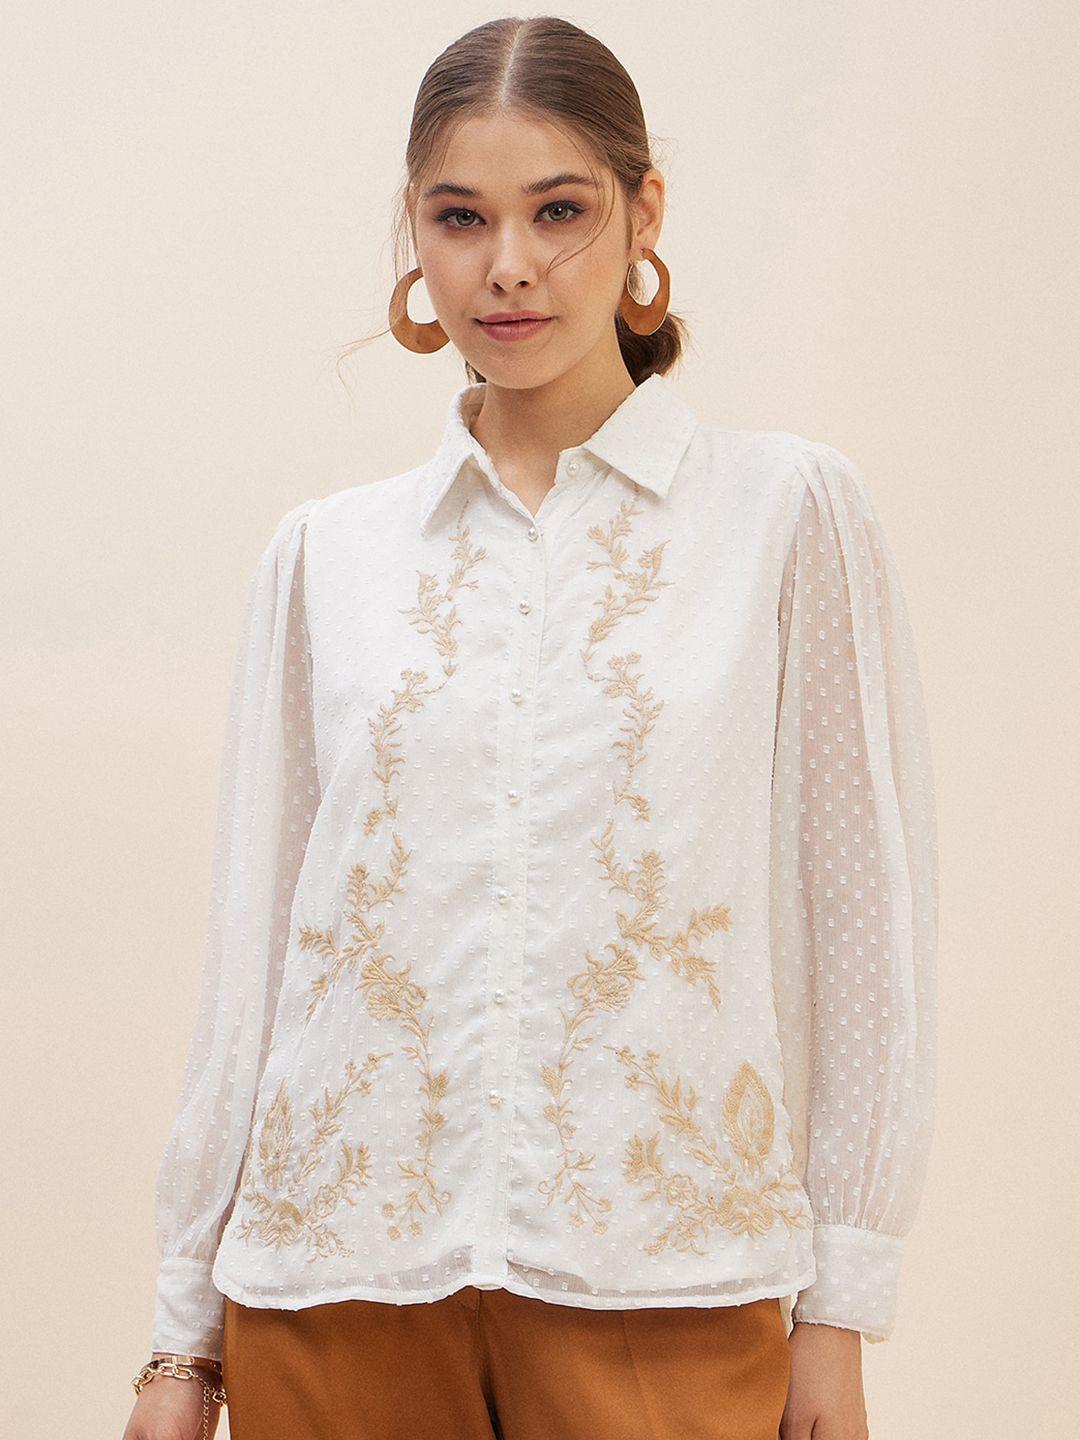 antheaa white floral self design cuffed sleeves embroidered detail shirt style top